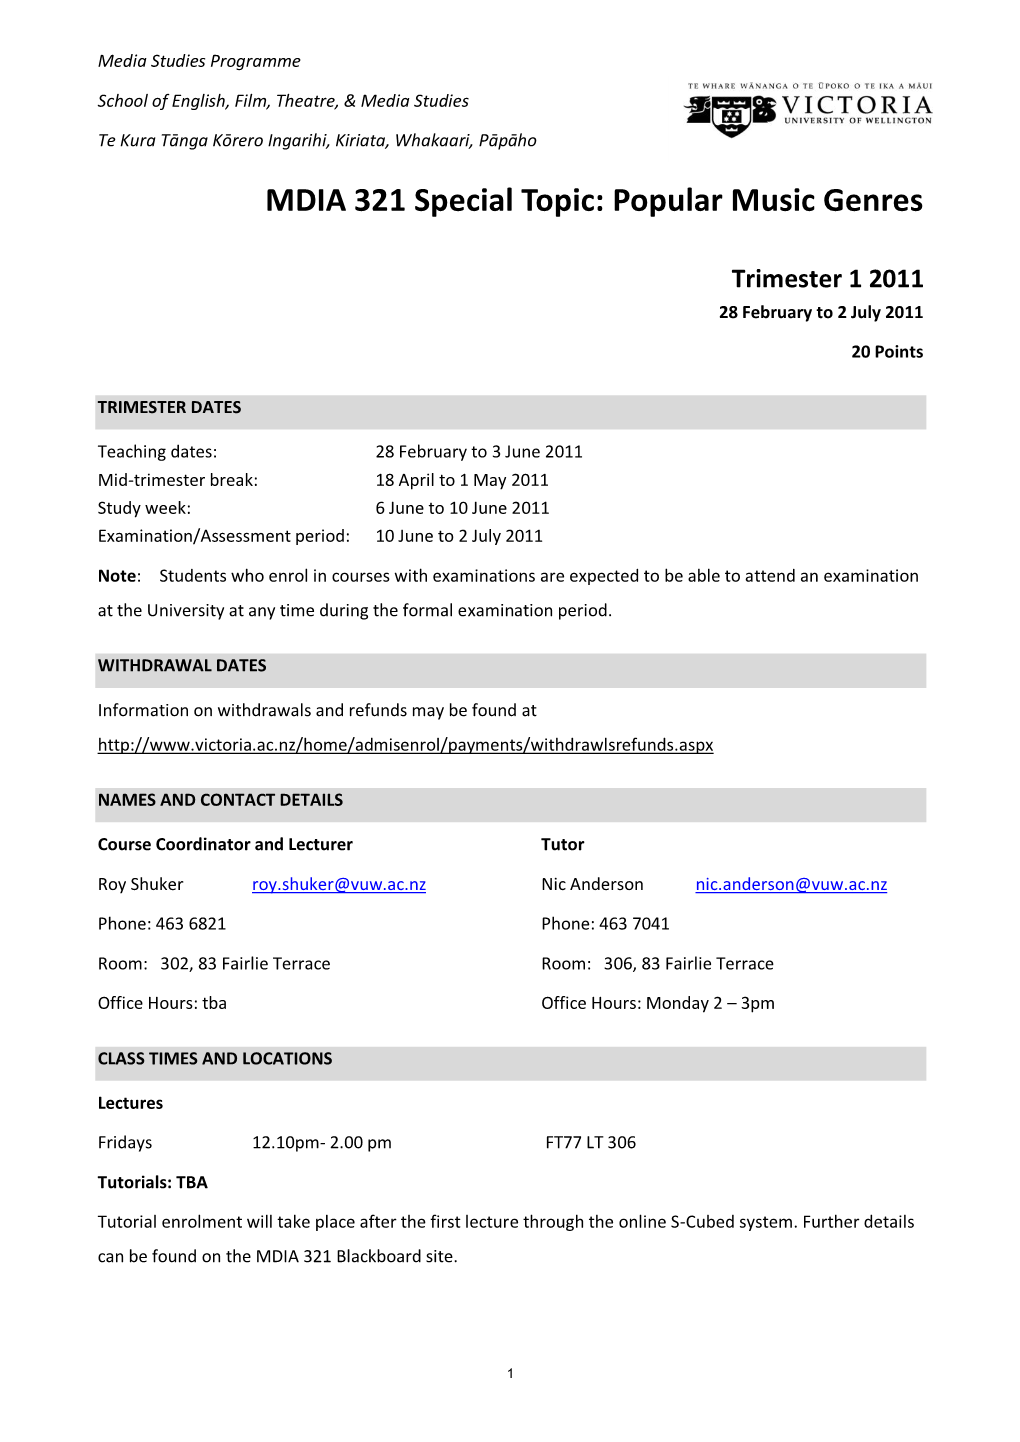 Course Outline Course Outline for MDIA321 Trimester1 2011